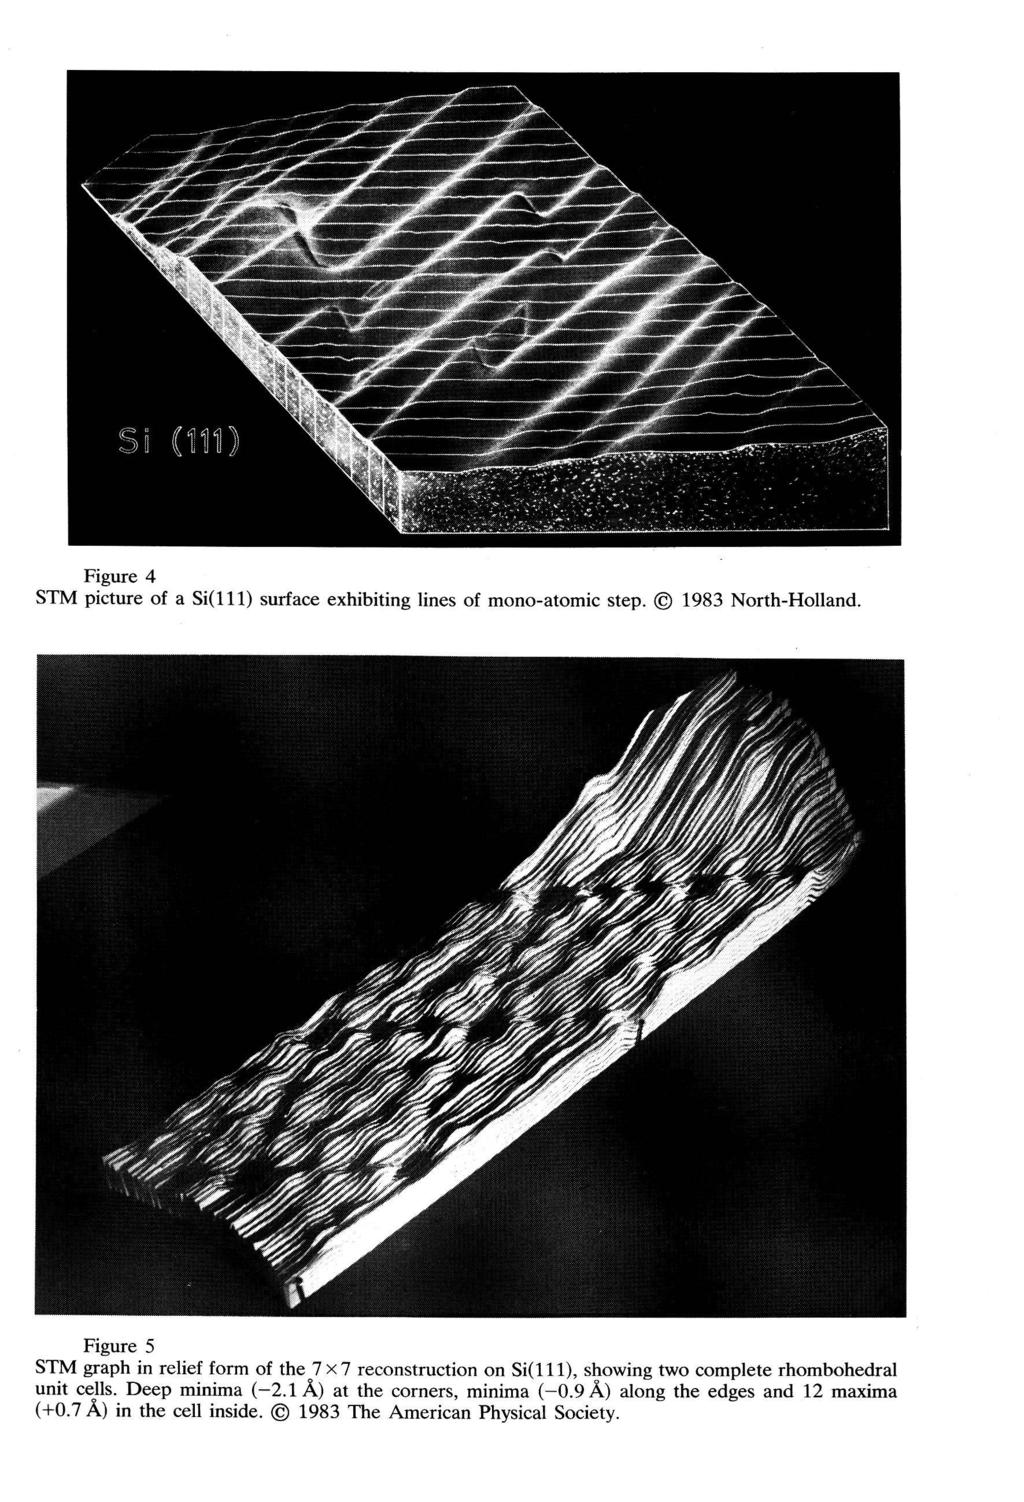 .Y* ^»1 (1111 Figure 4 STM picture of a Si(lll) surface exhibiting lines of mono-atomic step. 1983 North-Holland.